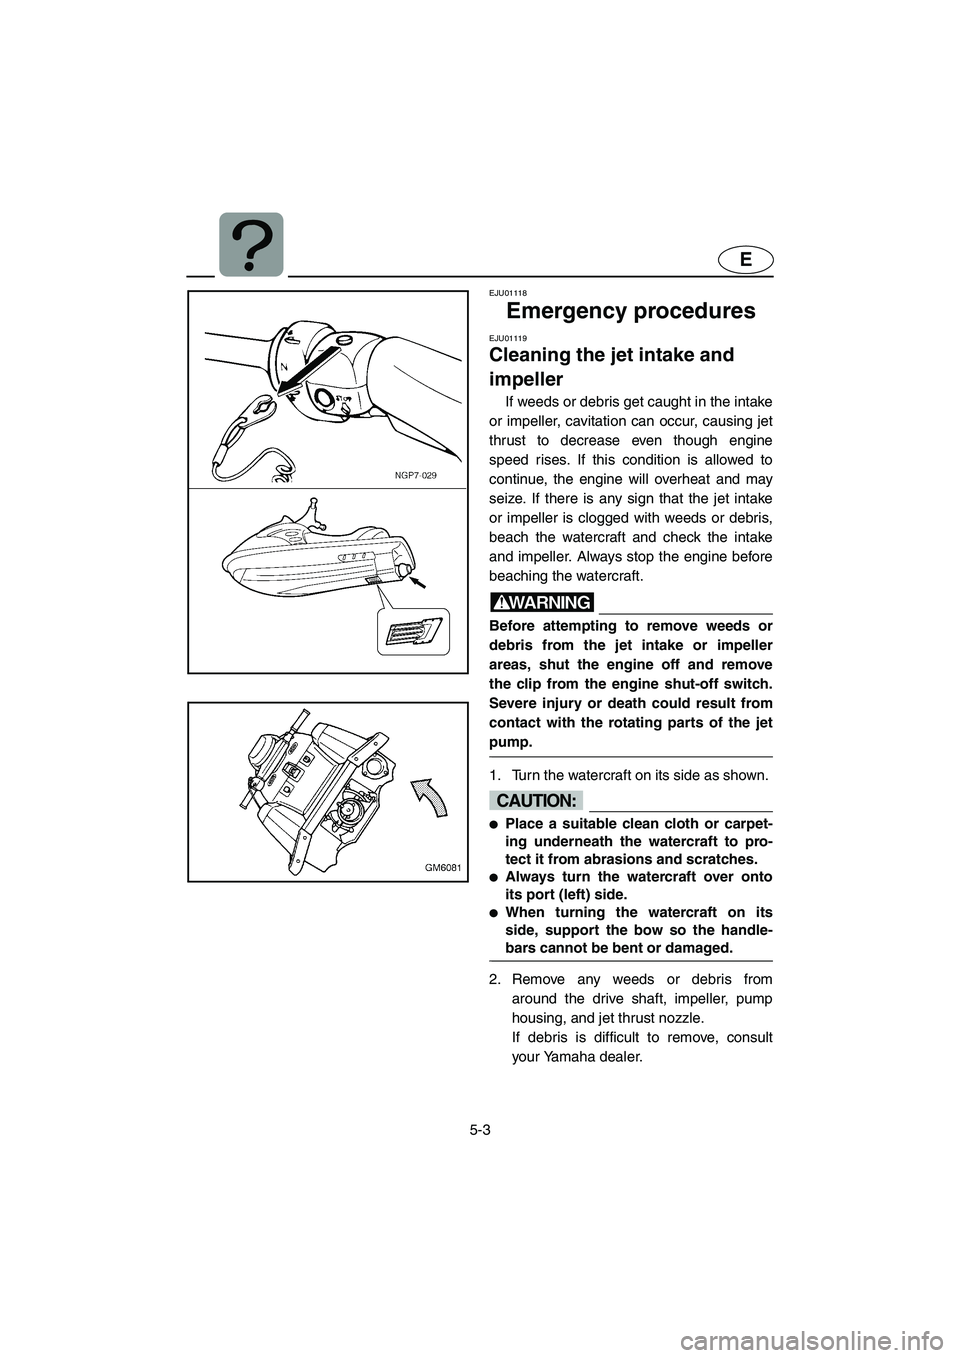 YAMAHA SUPERJET 2002  Owners Manual 5-3
E
EJU01118 
Emergency procedures 
EJU01119 
Cleaning the jet intake and 
impeller  
If weeds or debris get caught in the intake
or impeller, cavitation can occur, causing jet
thrust to decrease ev